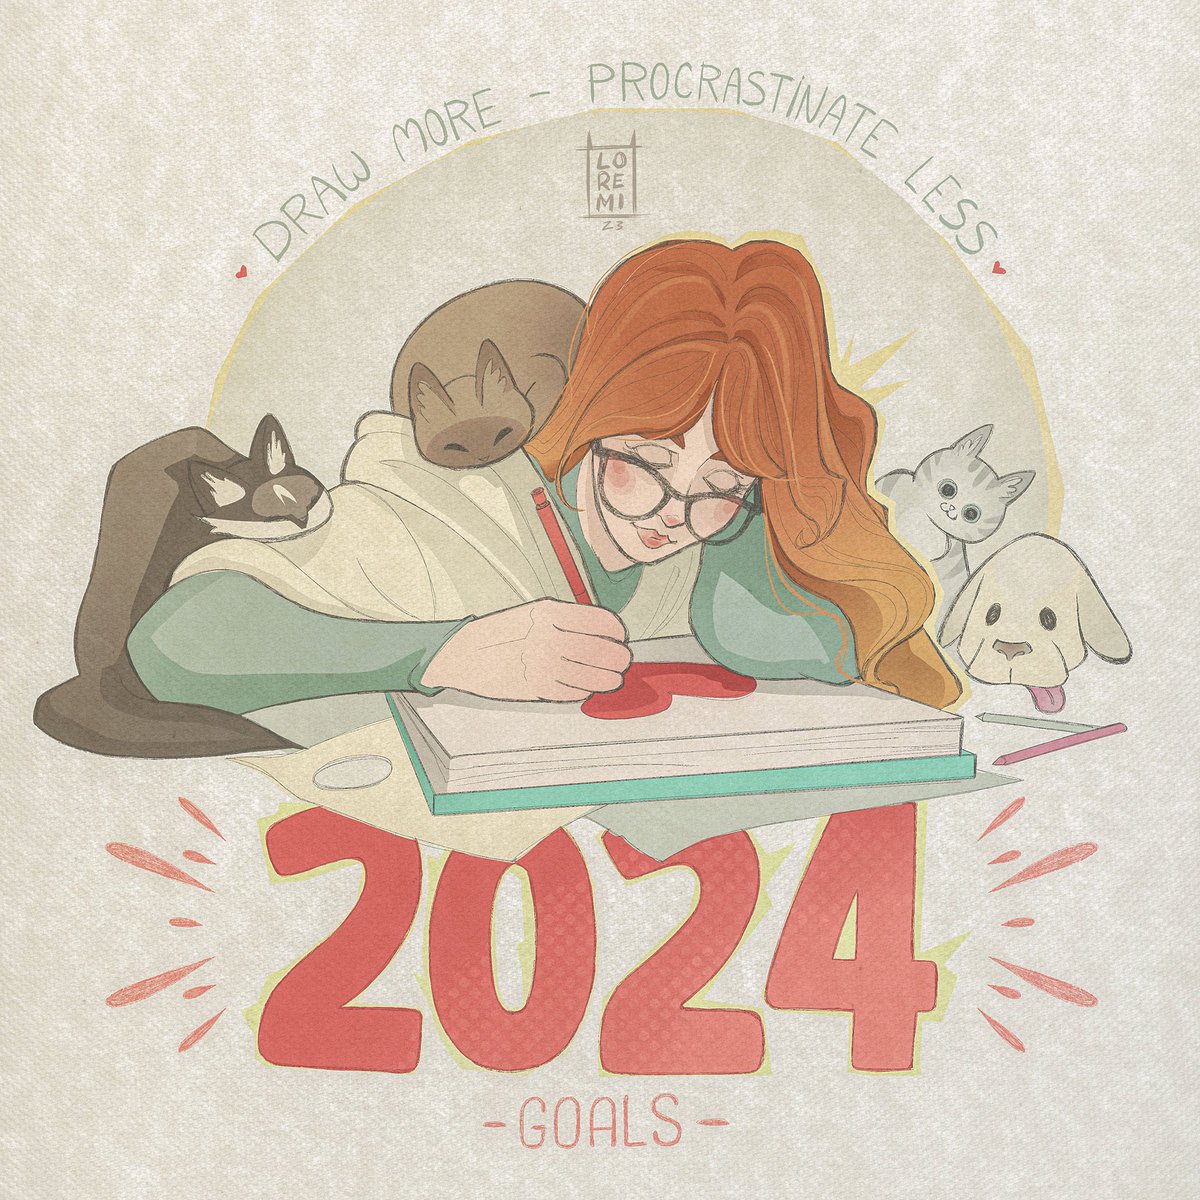 This year I have three #NewYearsResolutions.
This is the first one : draw more and procrastinate less.
I drew very little during 2023, but I planned and reflected a lot. Now it's time to take action and stop making up excuses to myself ❤️ #drawingoftheday #2024goals #digitalart